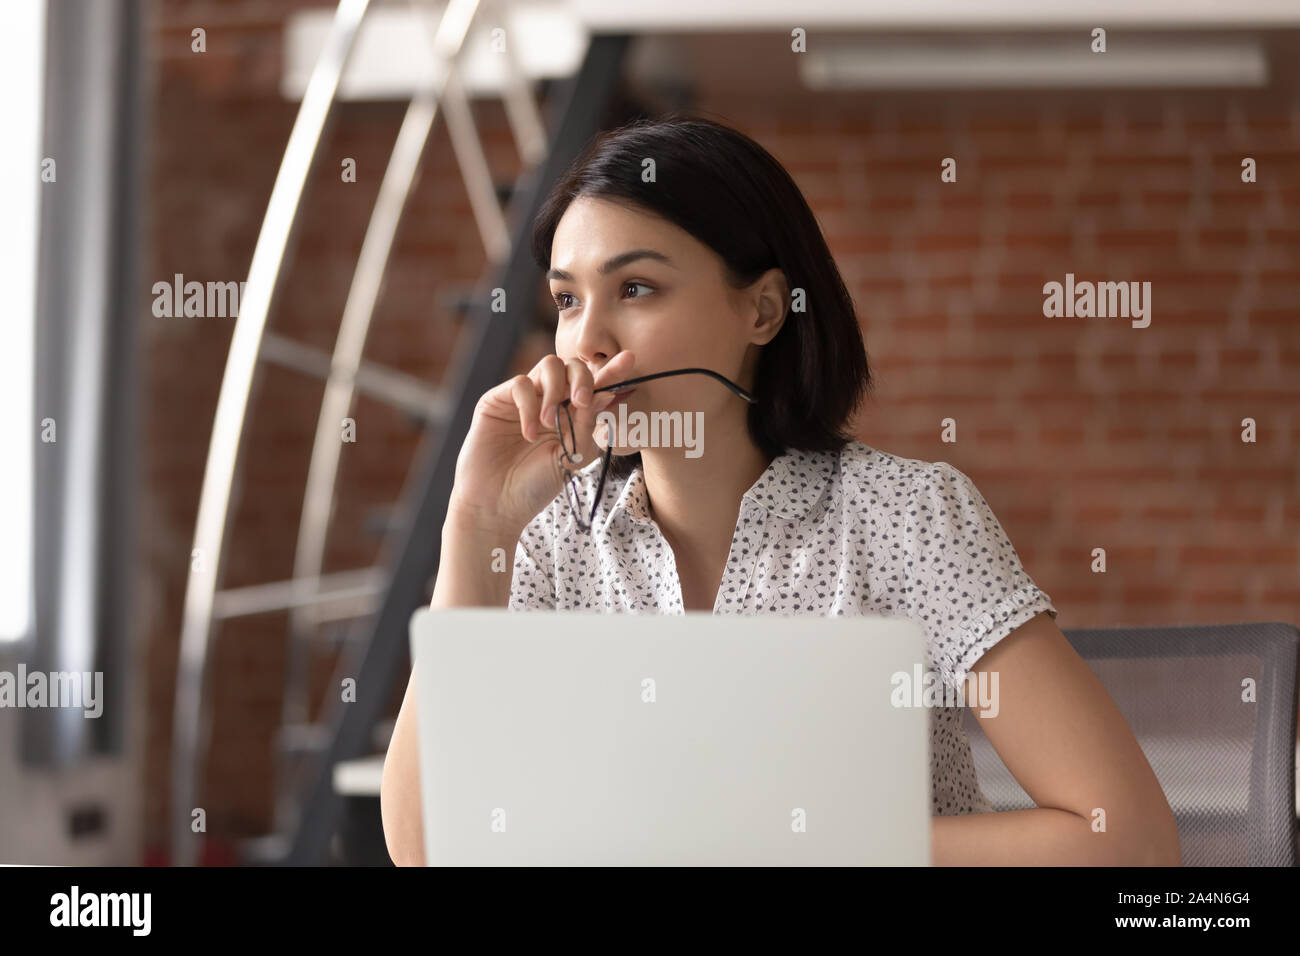 Thoughtful Asian businesswoman taking off glasses, pondering ideas Stock Photo